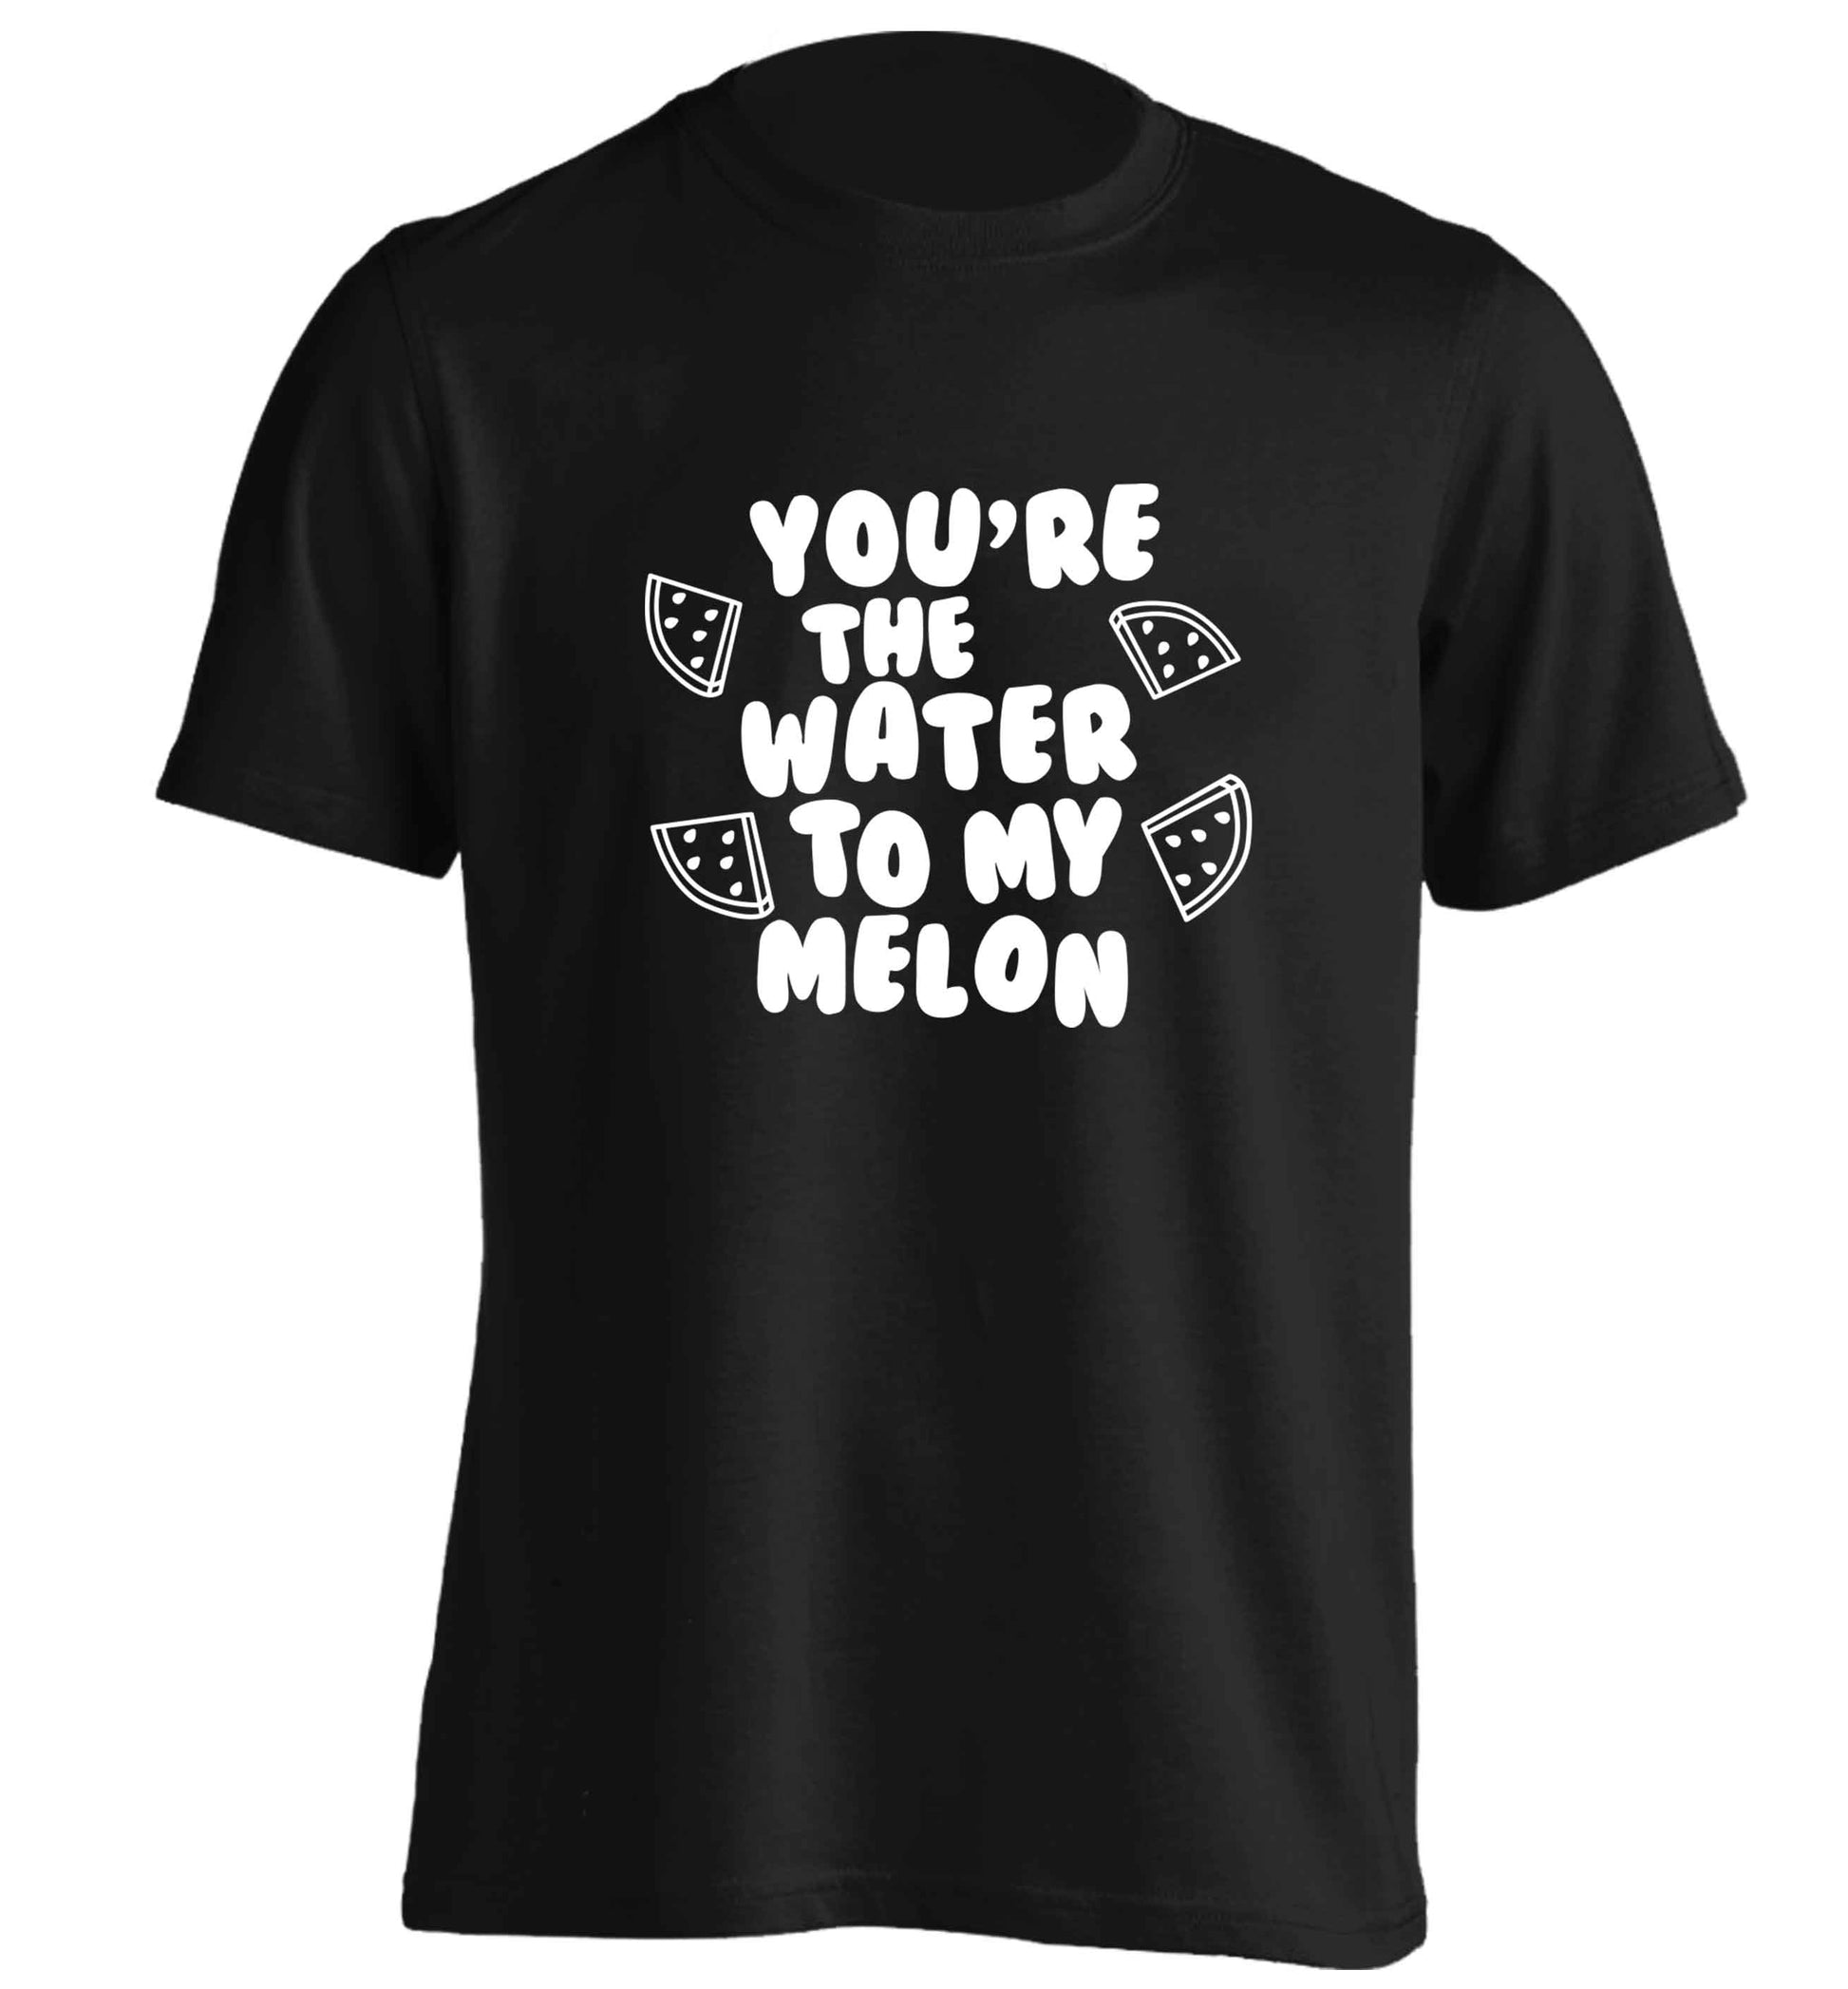 You're the water to my melon adults unisex black Tshirt 2XL